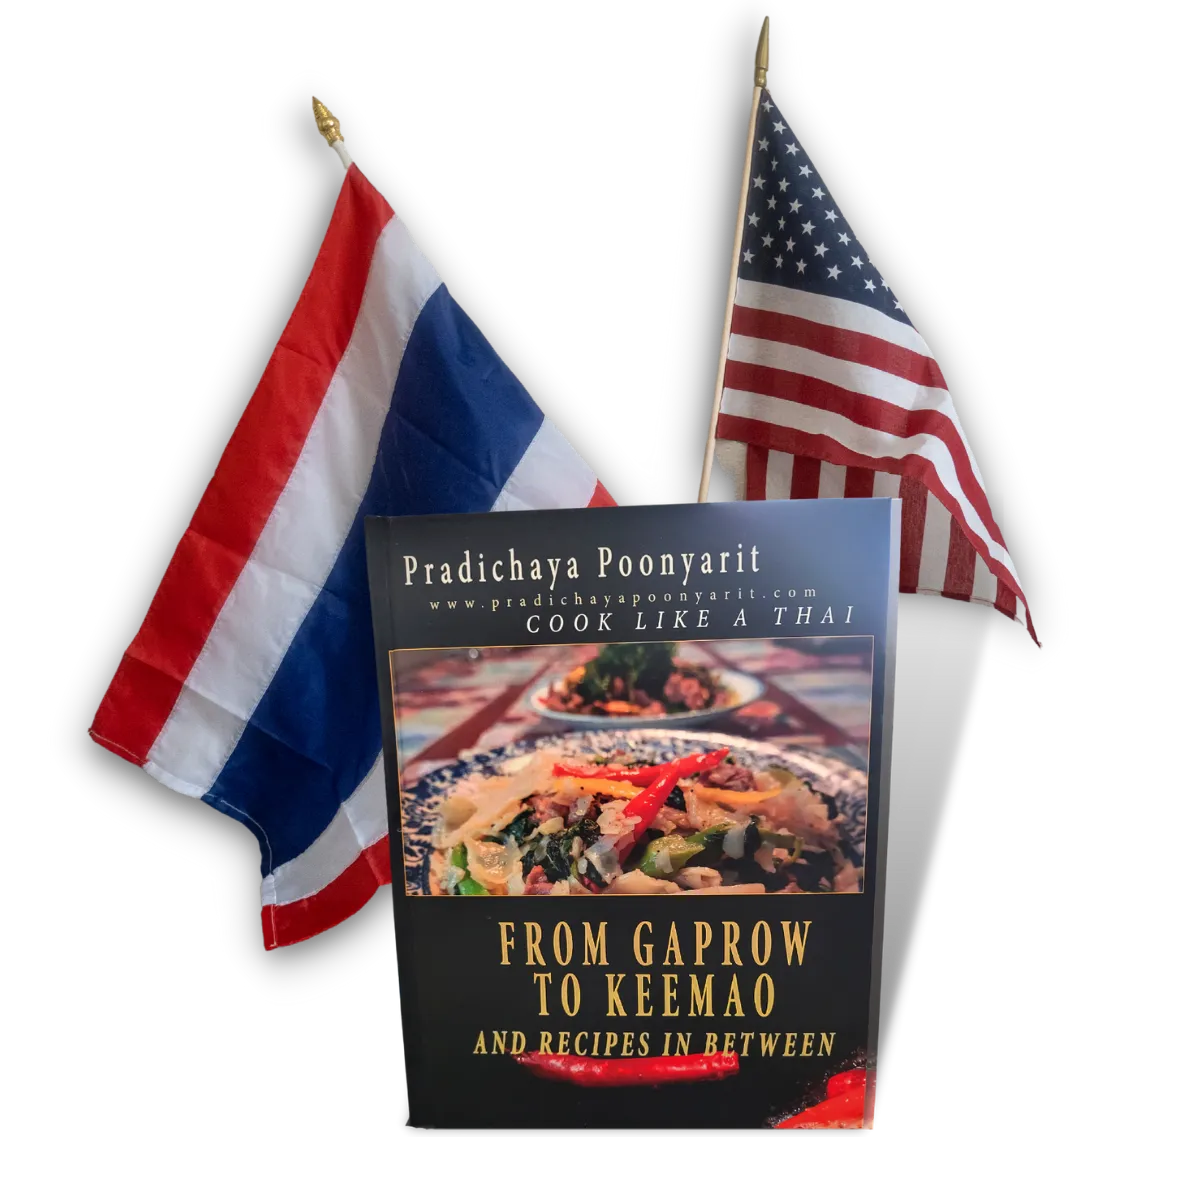 From Gaprow To Keemao And Recipes In Between: the COOK LIKE A THAI book that will help you get to your goal of cooking true-to-origin dishes just like a Thai